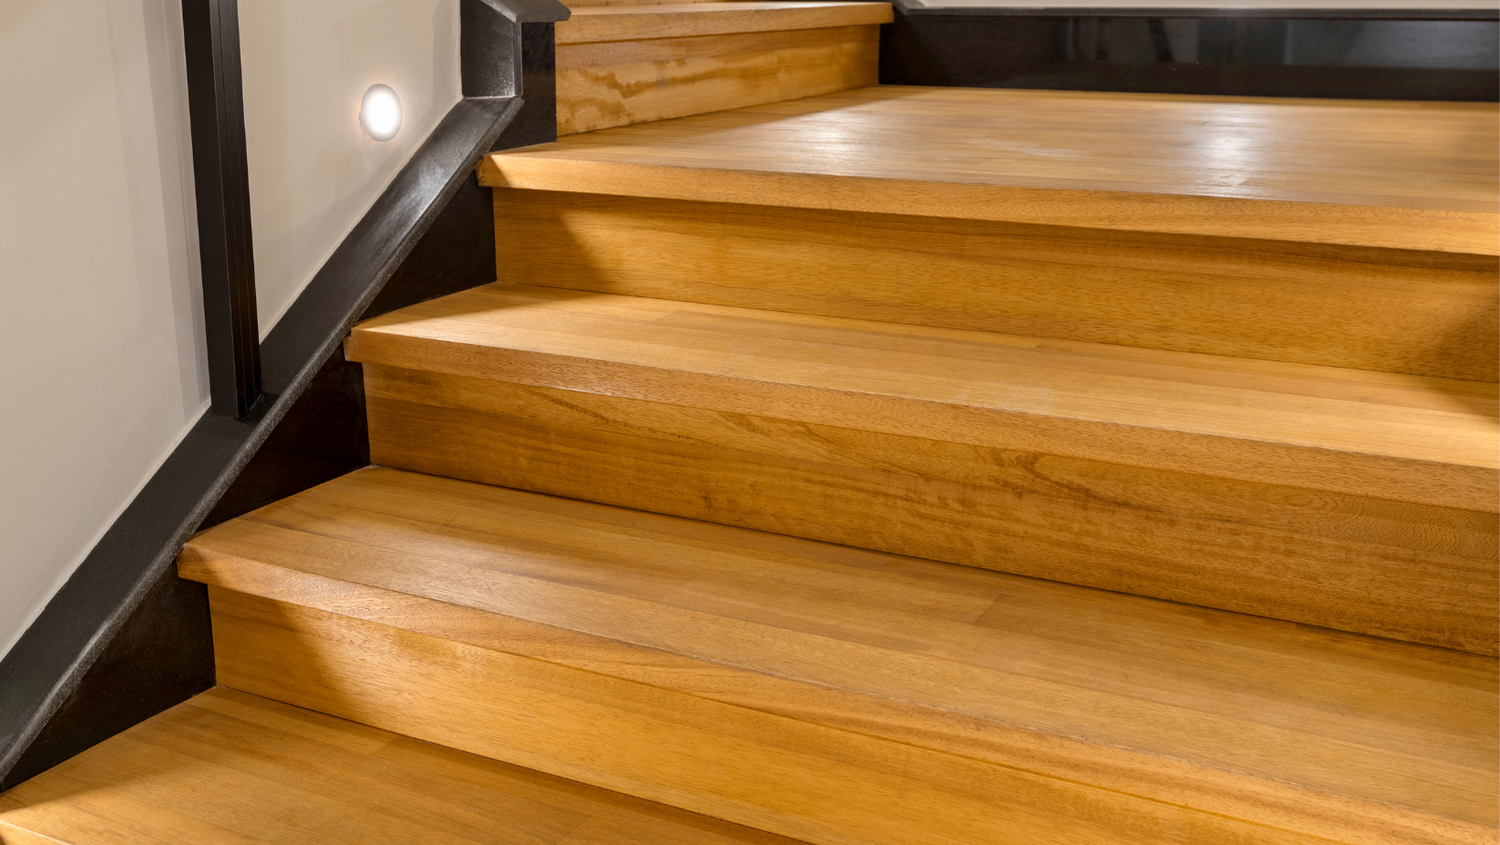 Stair Grips For Wooden Stairs